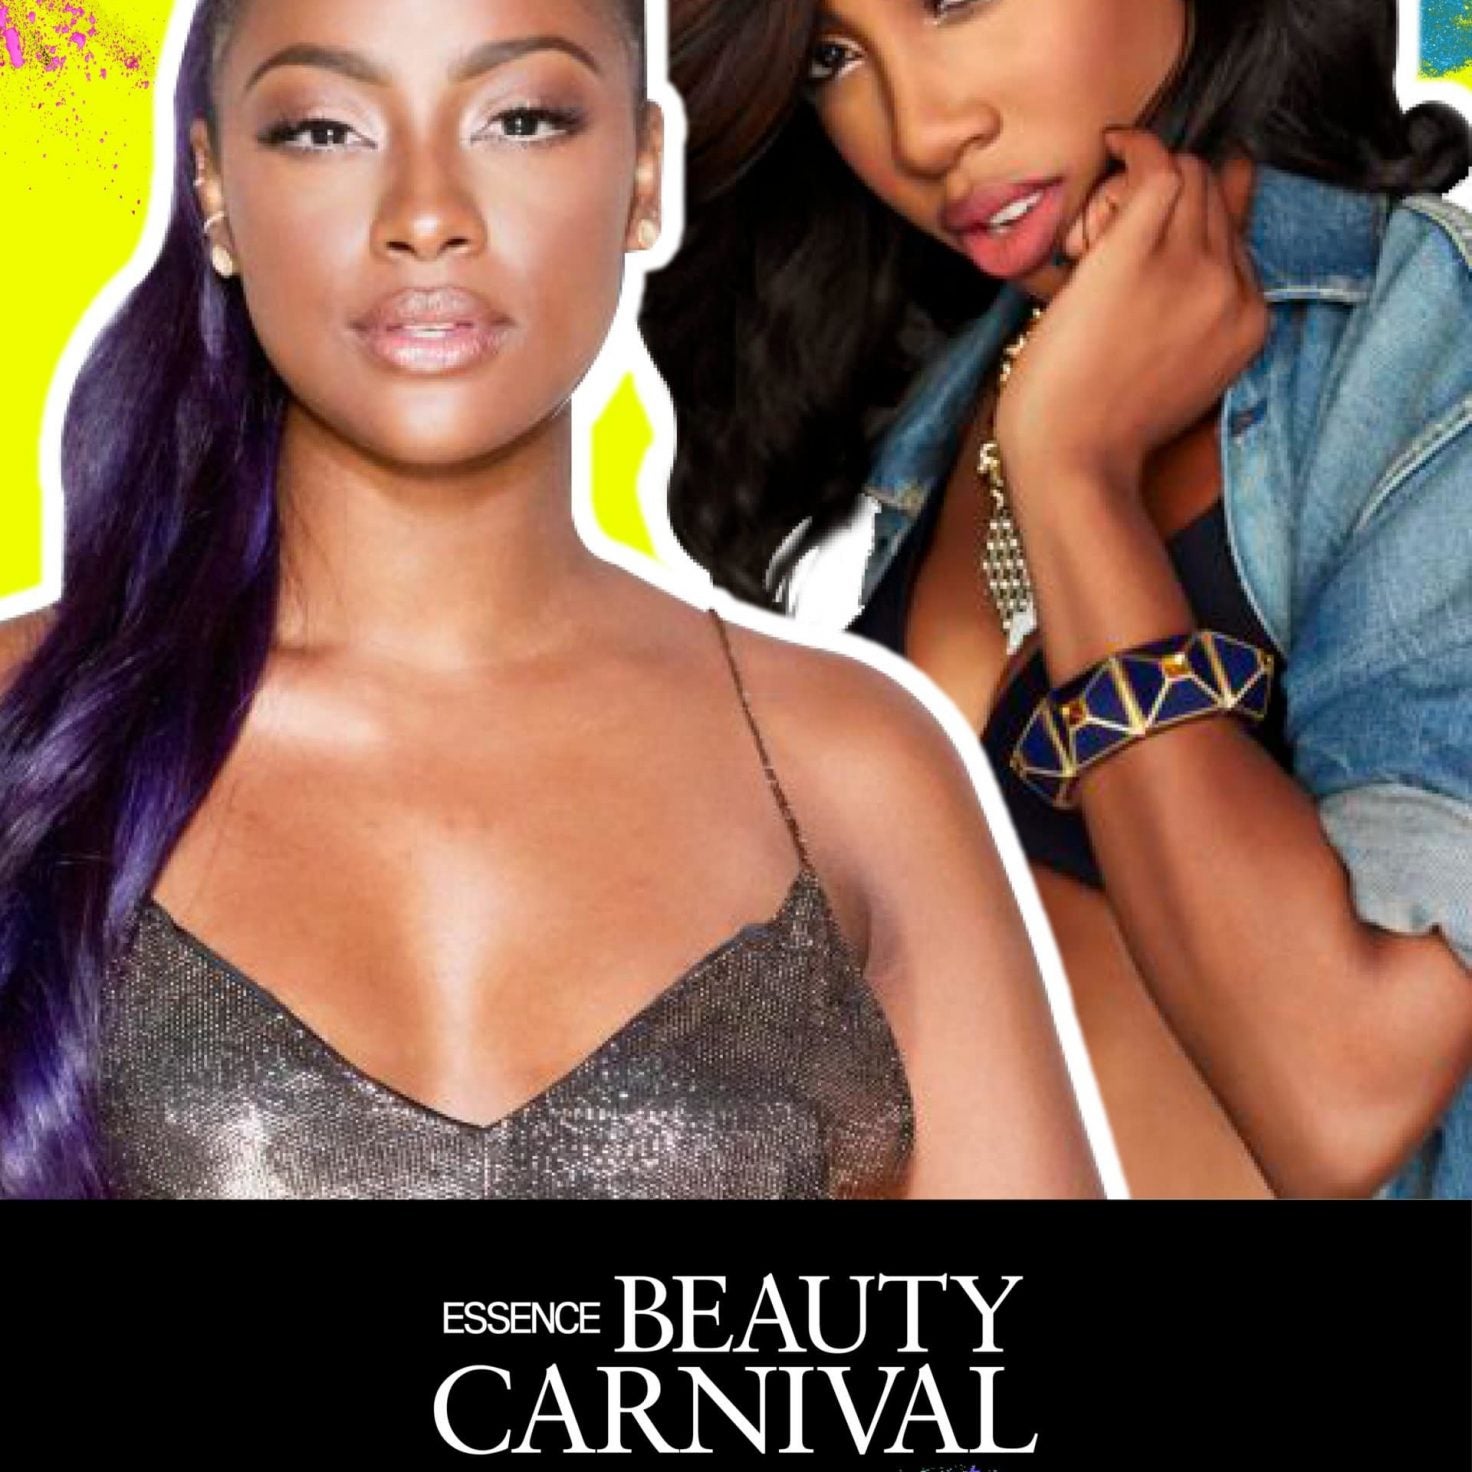 JUST ANNOUNCED: Justine Skye & Sevyn Streeter To Perform At ESSENCE Beauty Carnival NYC